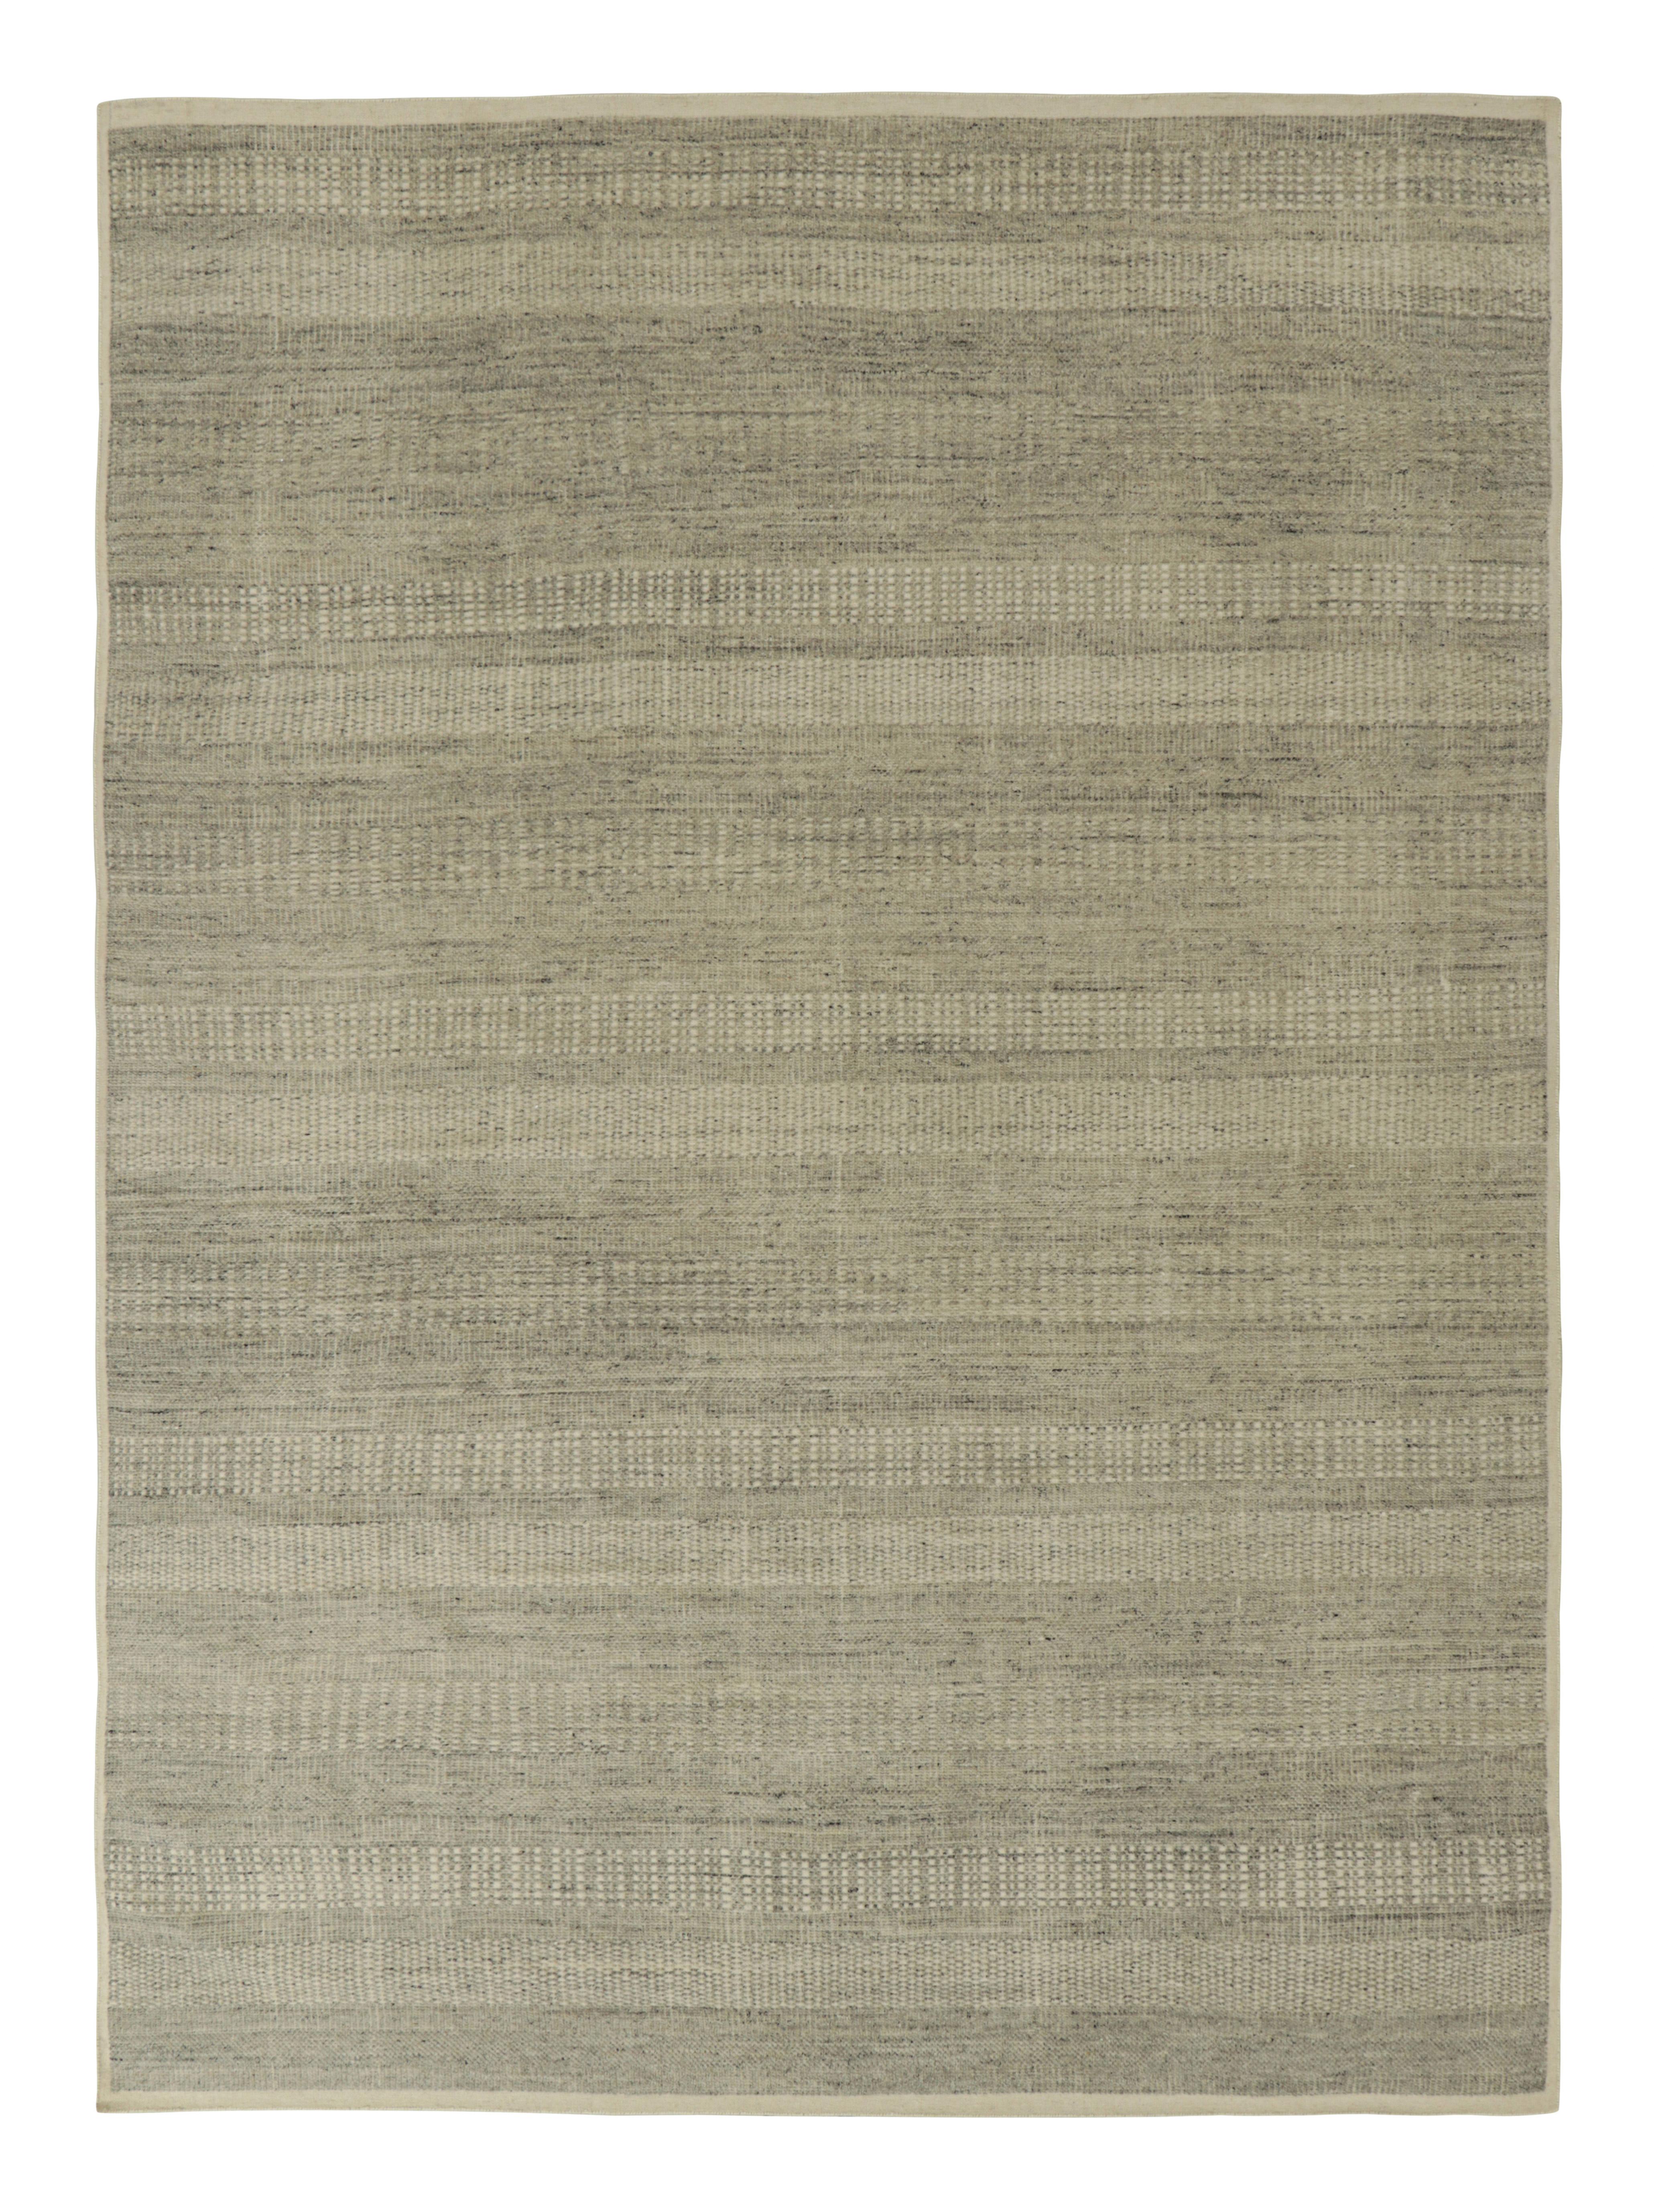 Rug & Kilim’s Contemporary Textural Rug in Cream and Gray Tones In New Condition For Sale In Long Island City, NY